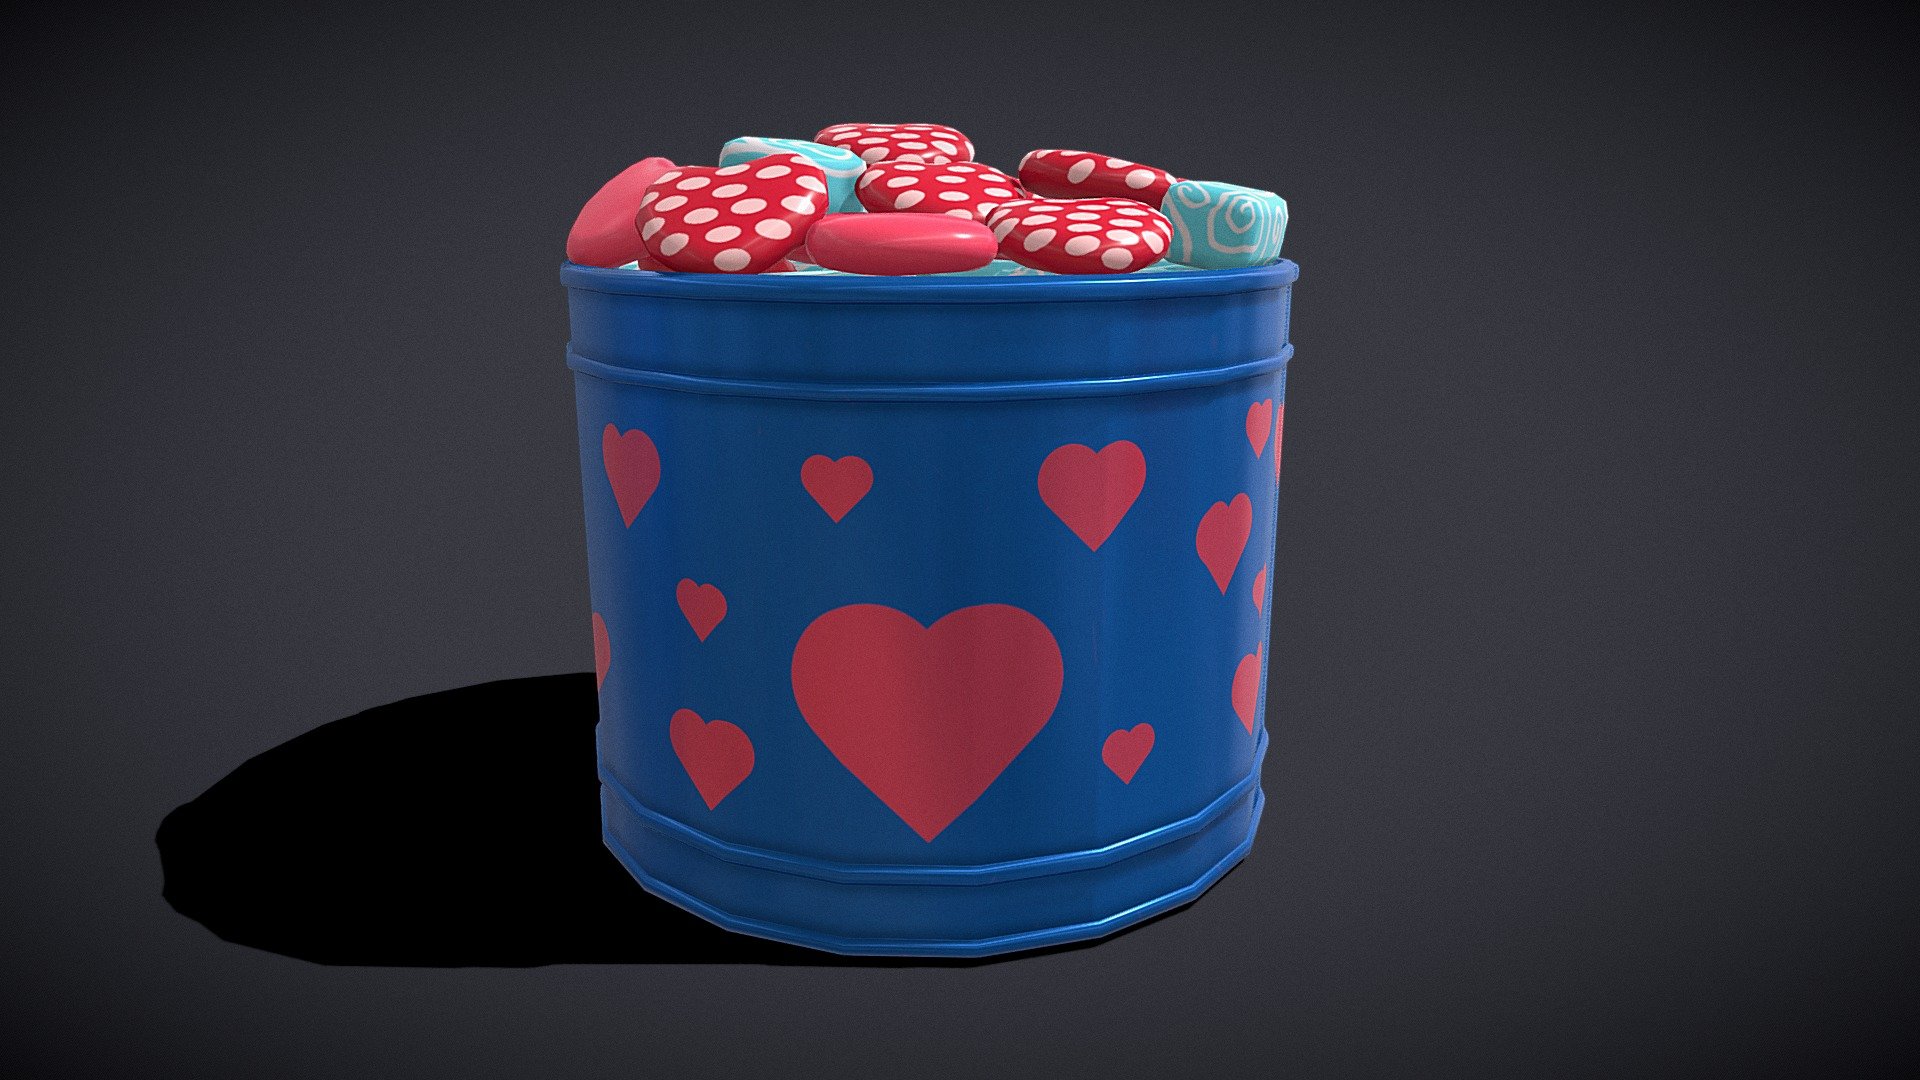 Valentine Heart Candy Tin
VR / AR / Low-poly
PBR approved
Geometry Polygon mesh
Polygons 4,444
Vertices 4,495
Textures 4K
Materials 1 - Valentine Heart Candy Tin - Buy Royalty Free 3D model by GetDeadEntertainment 3d model